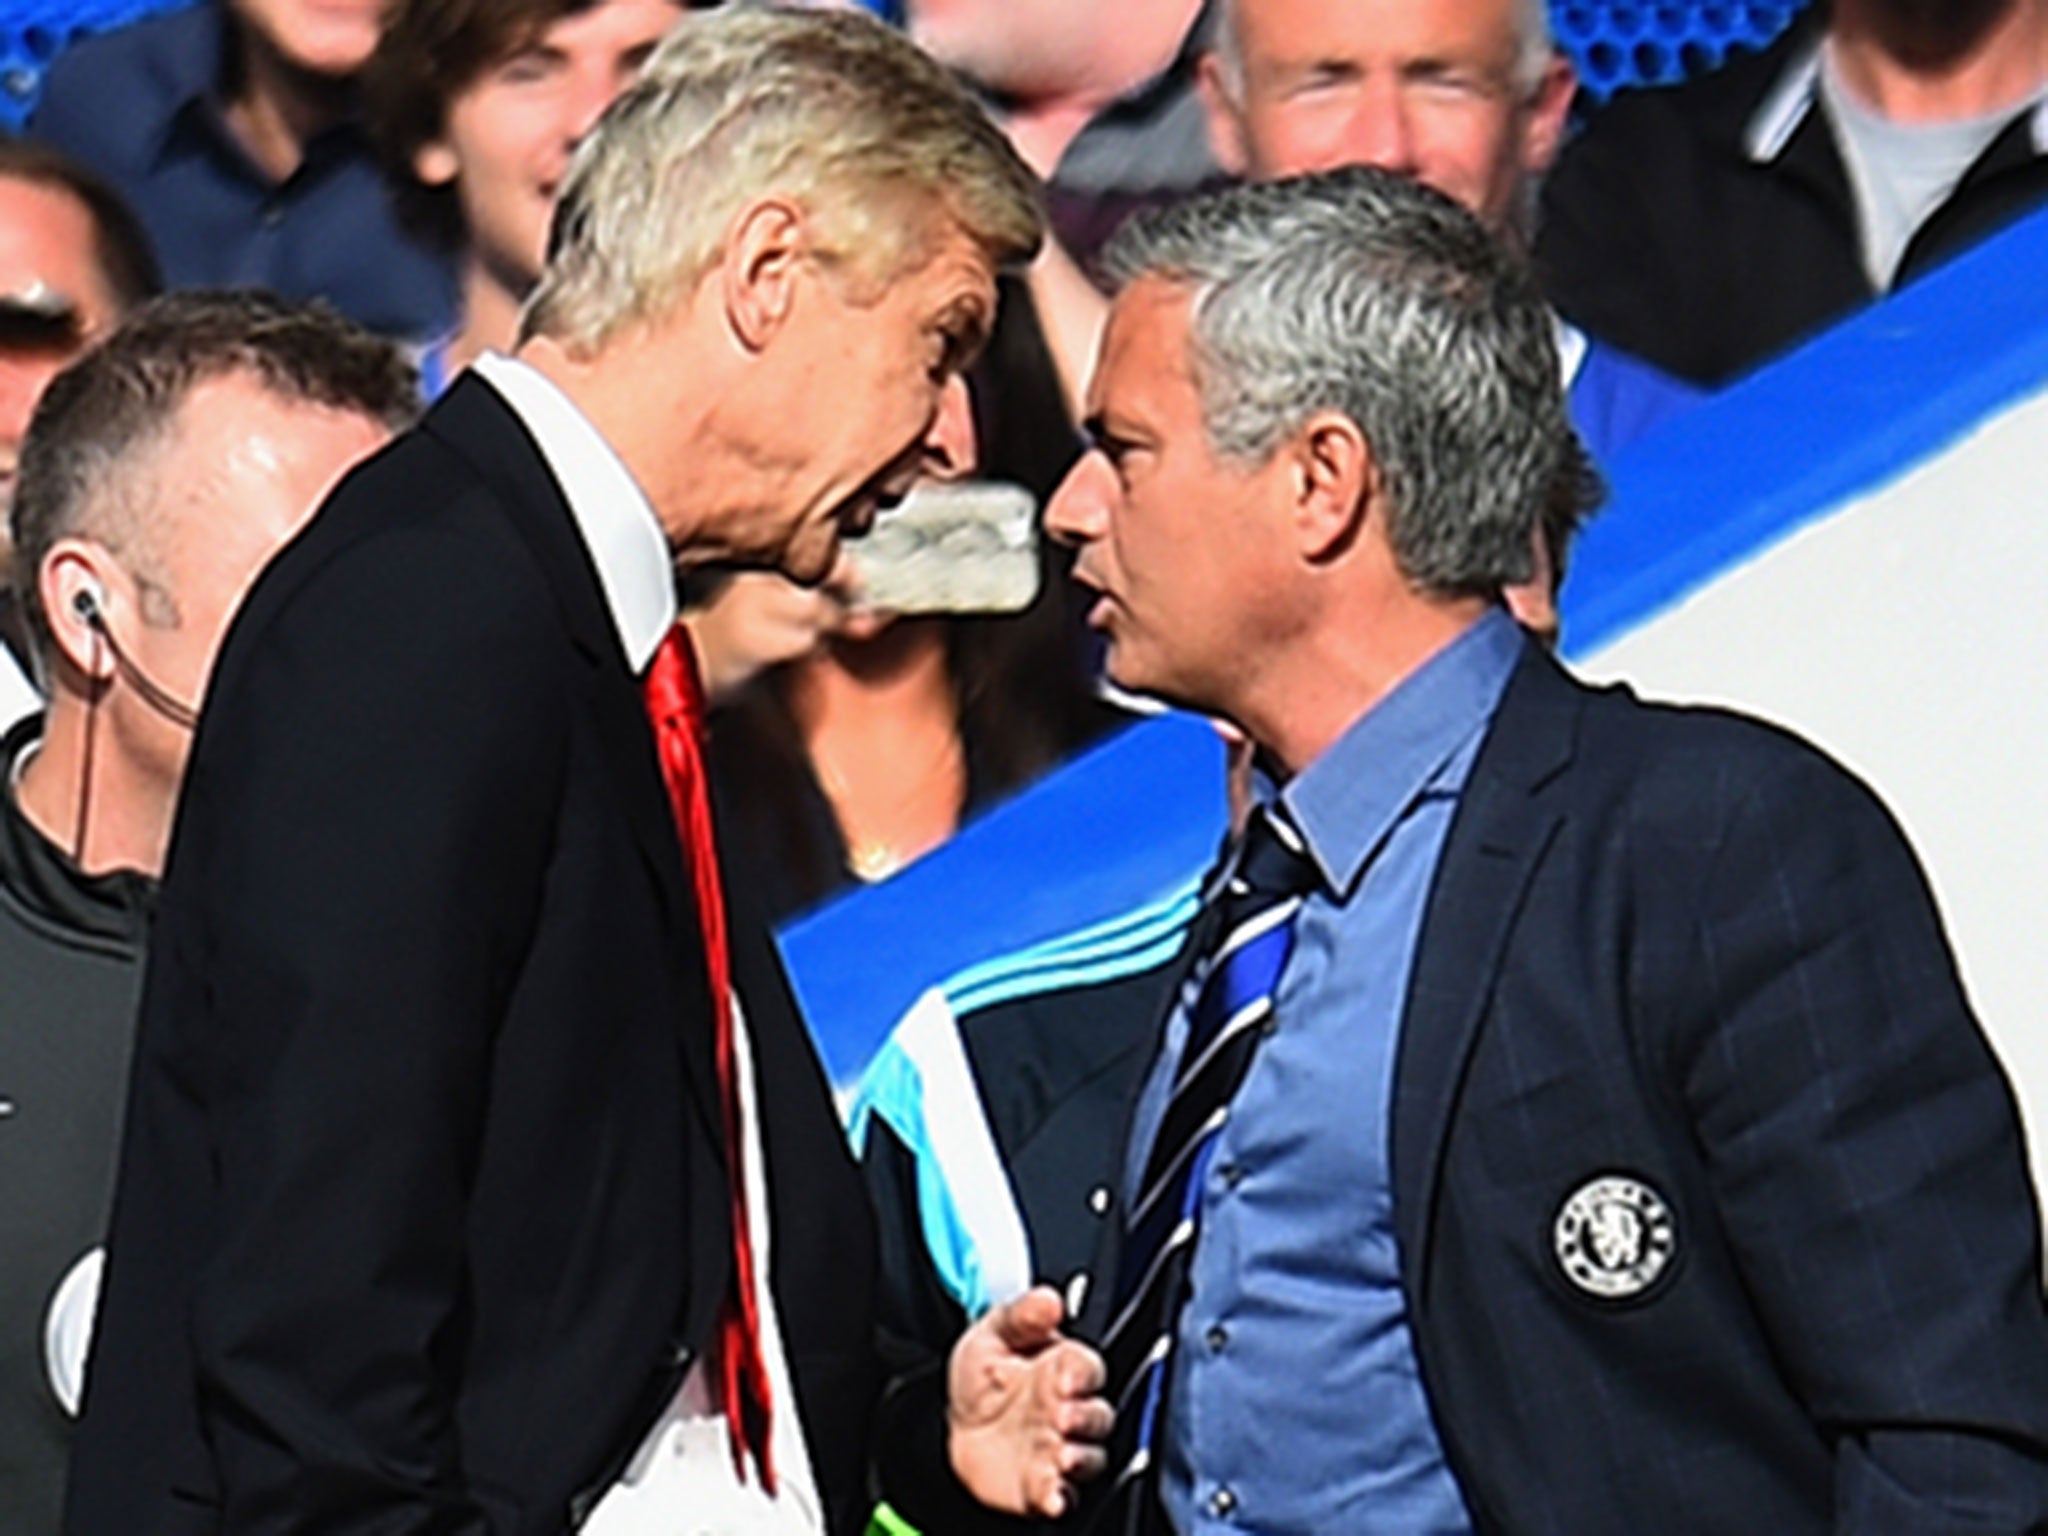 Arsene Wenger and Jose Mourinho clash on the touchline during Chelsea's recent win over Arsenal